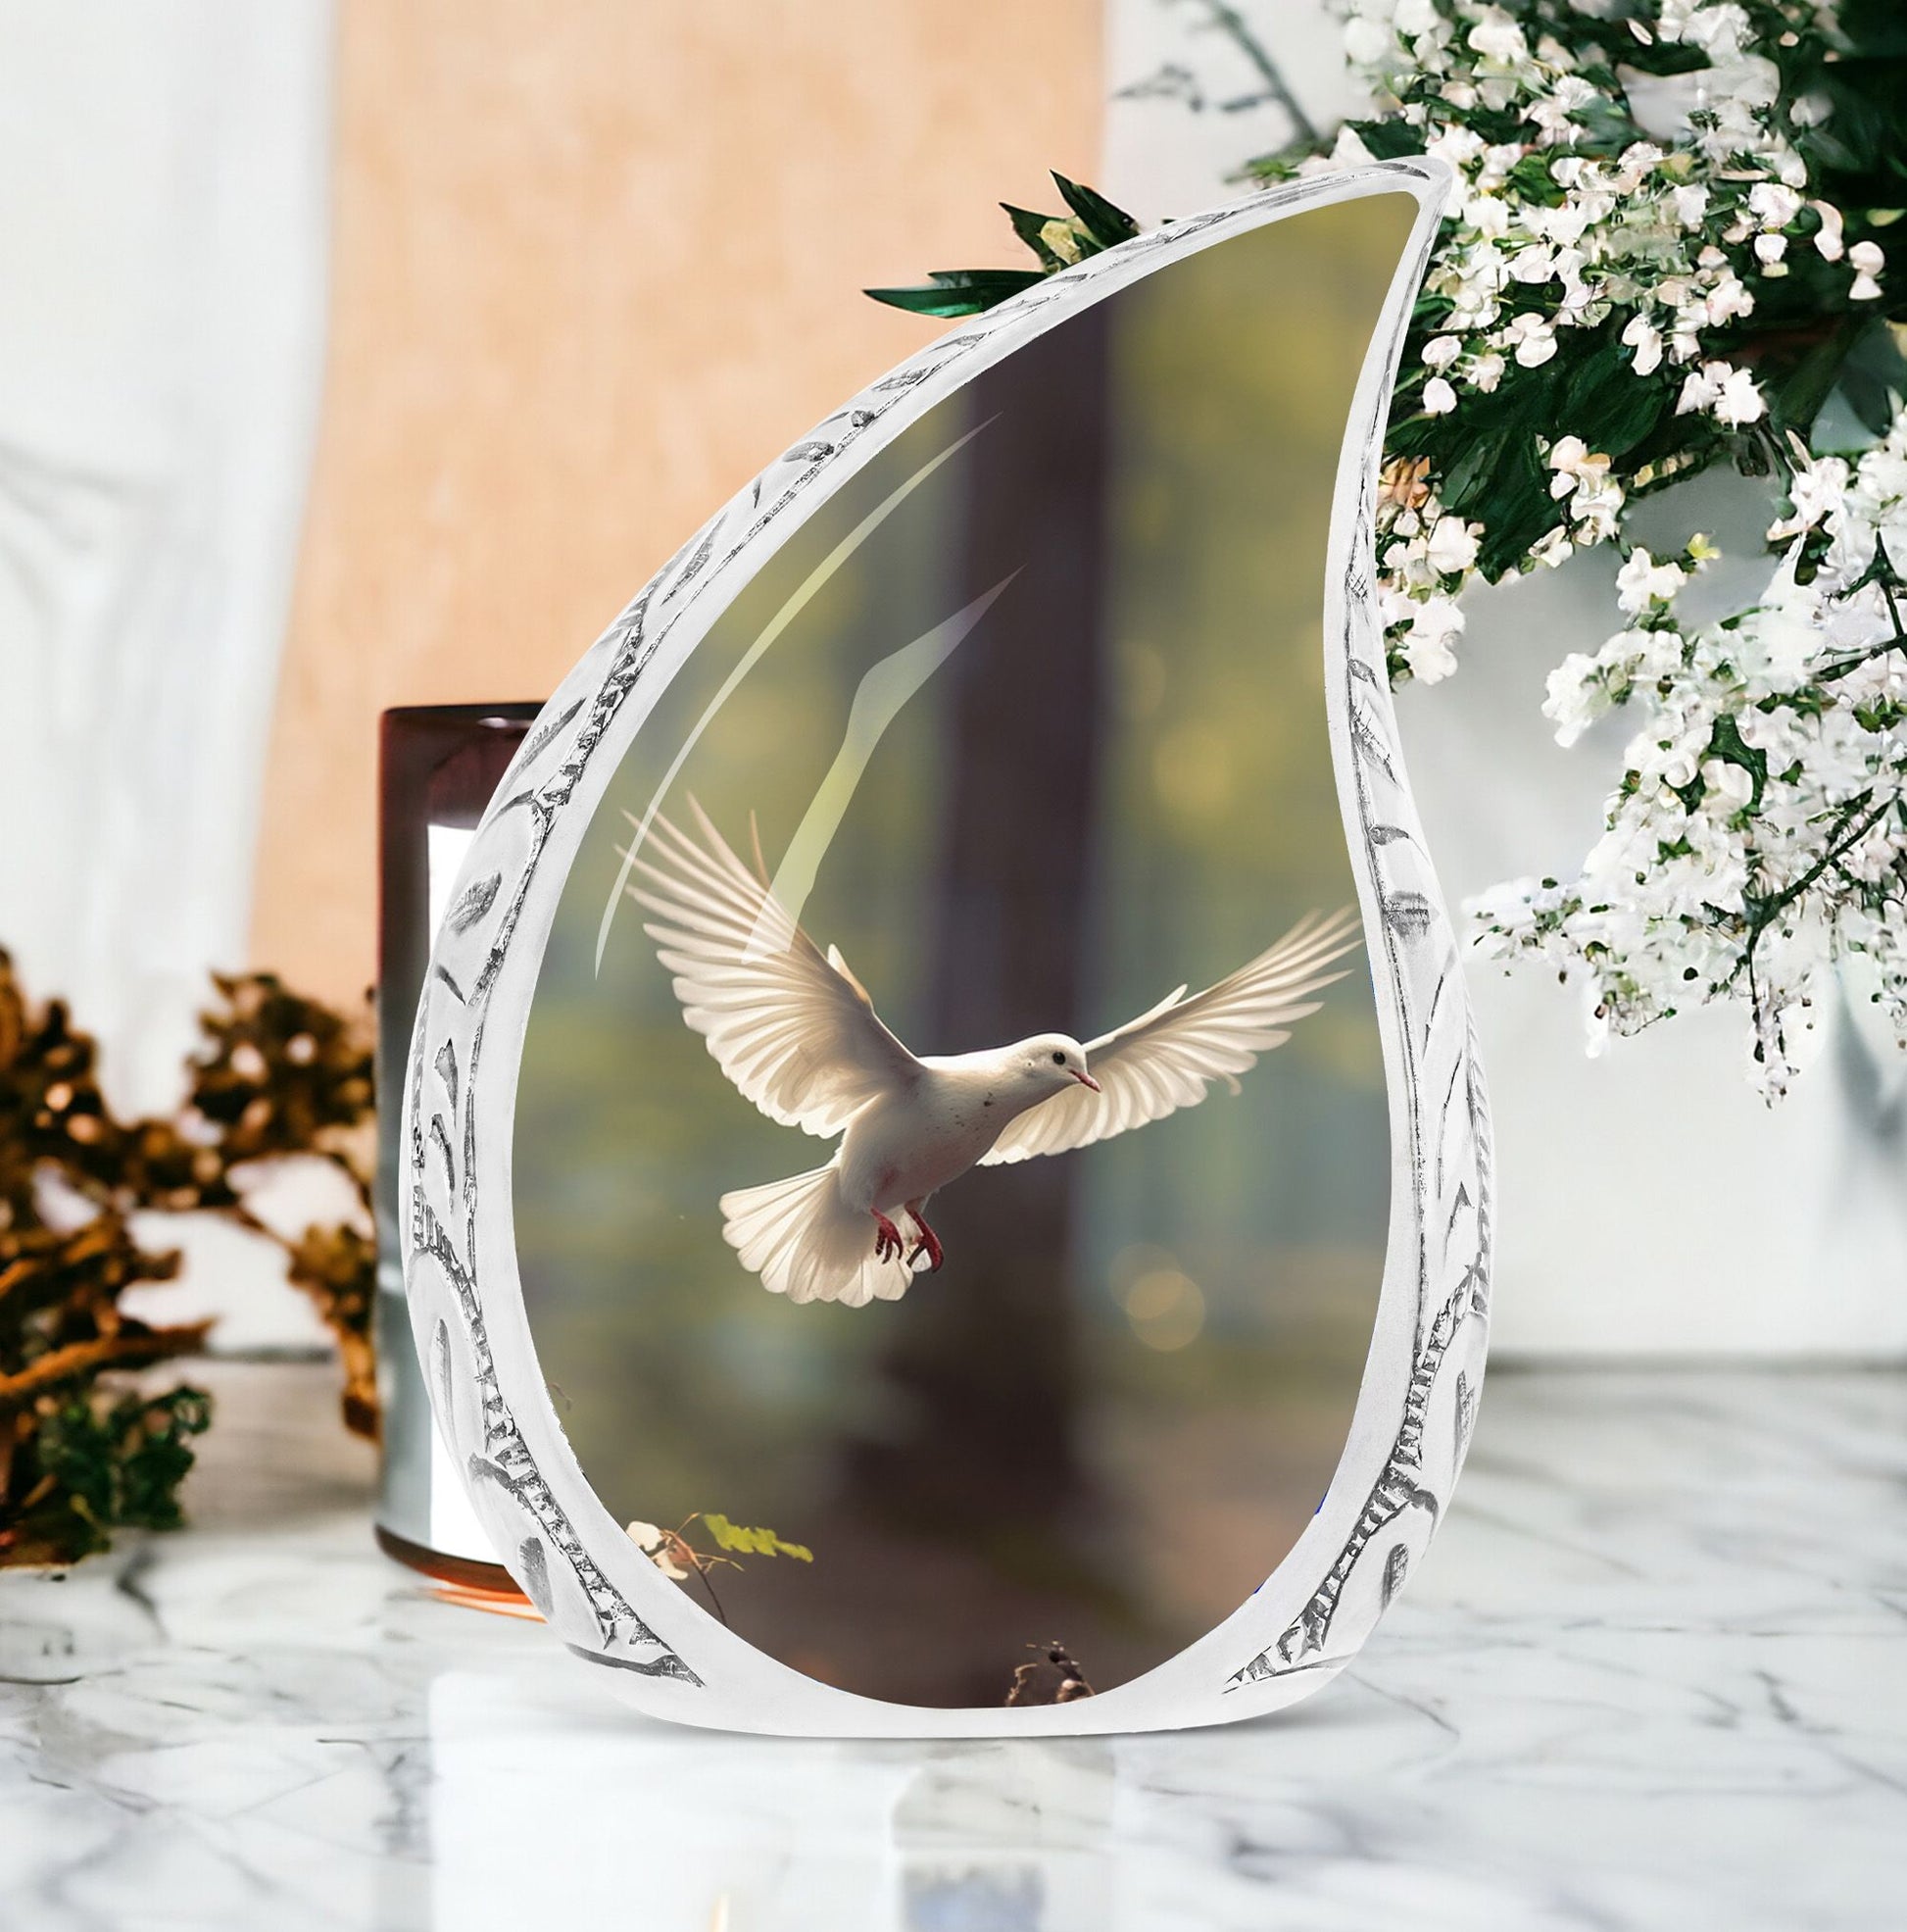 Large urn for adult ashes with Dove flying theme, ideal for funeral decorations and cremation ceremonies